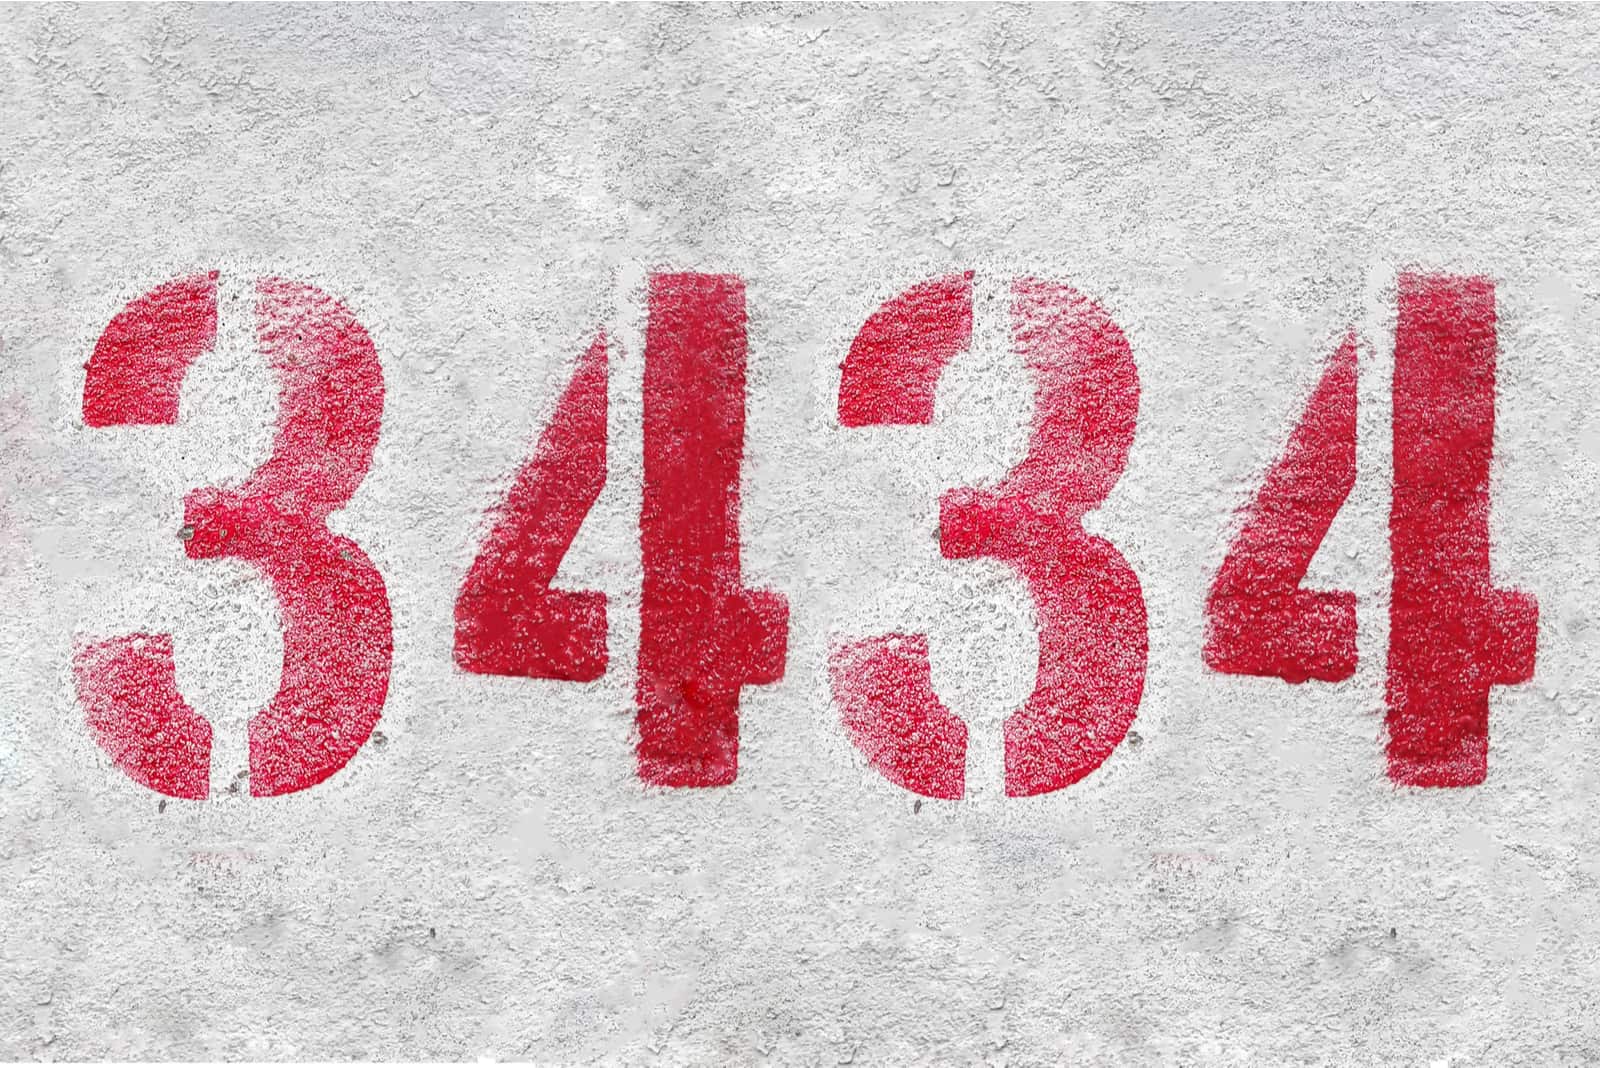 3434 in red on a gray background